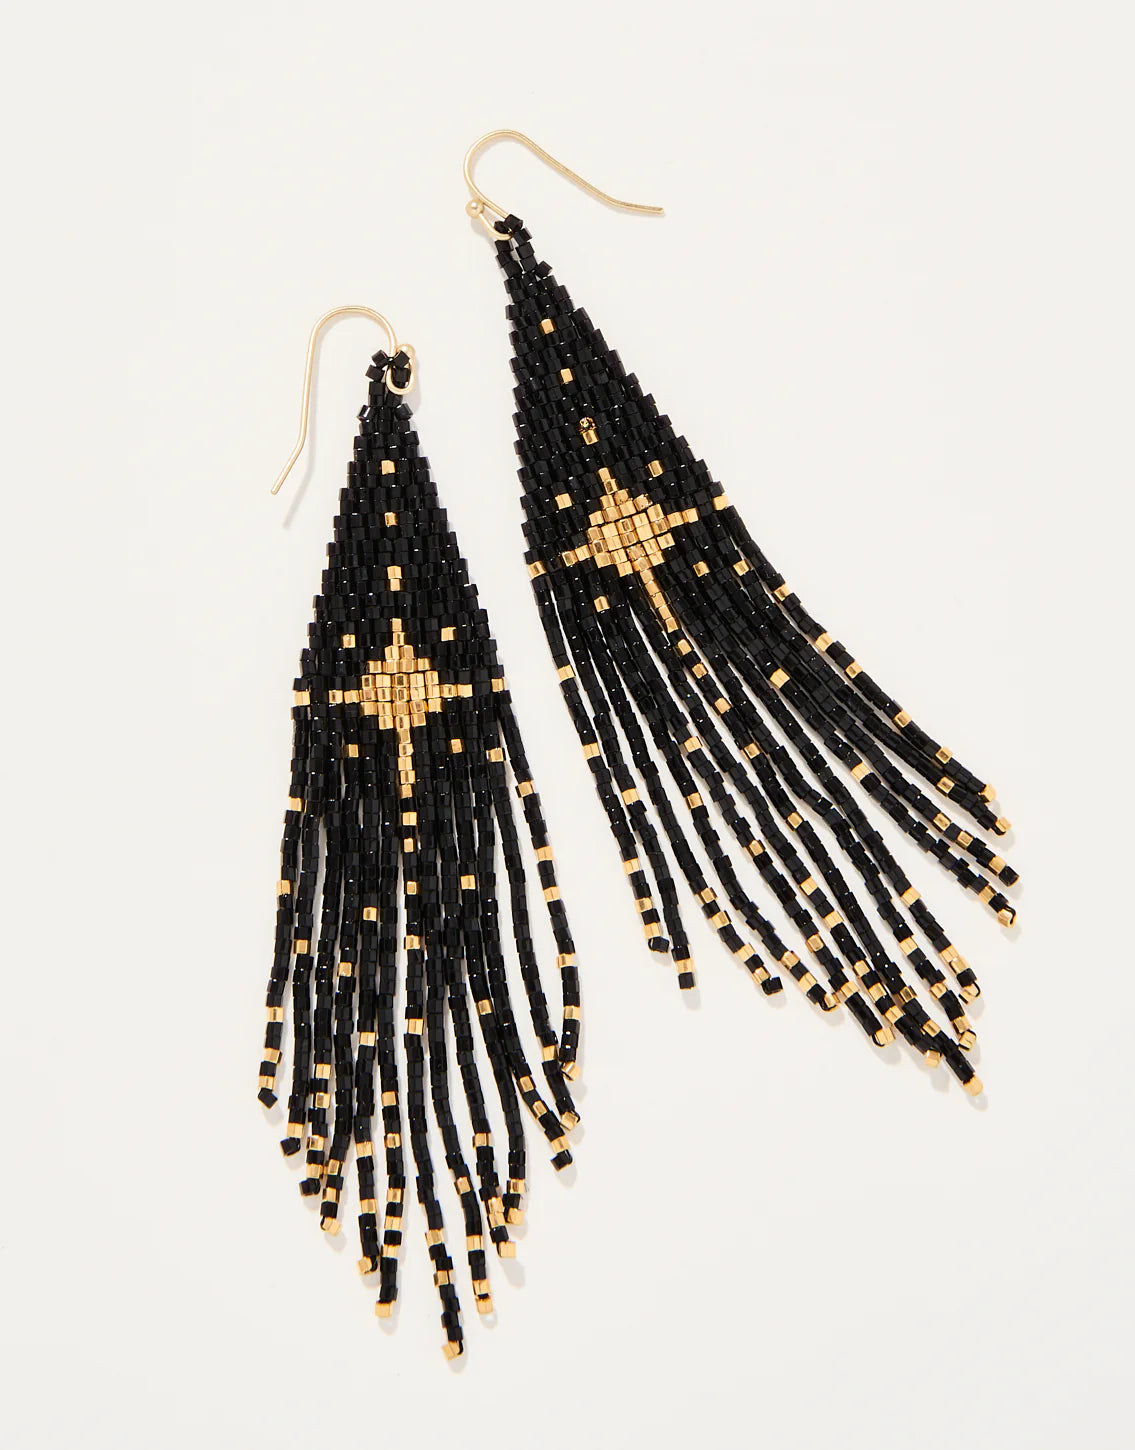 Spartina 449 Bitty Bead Earrings Starry Night black and gold beads